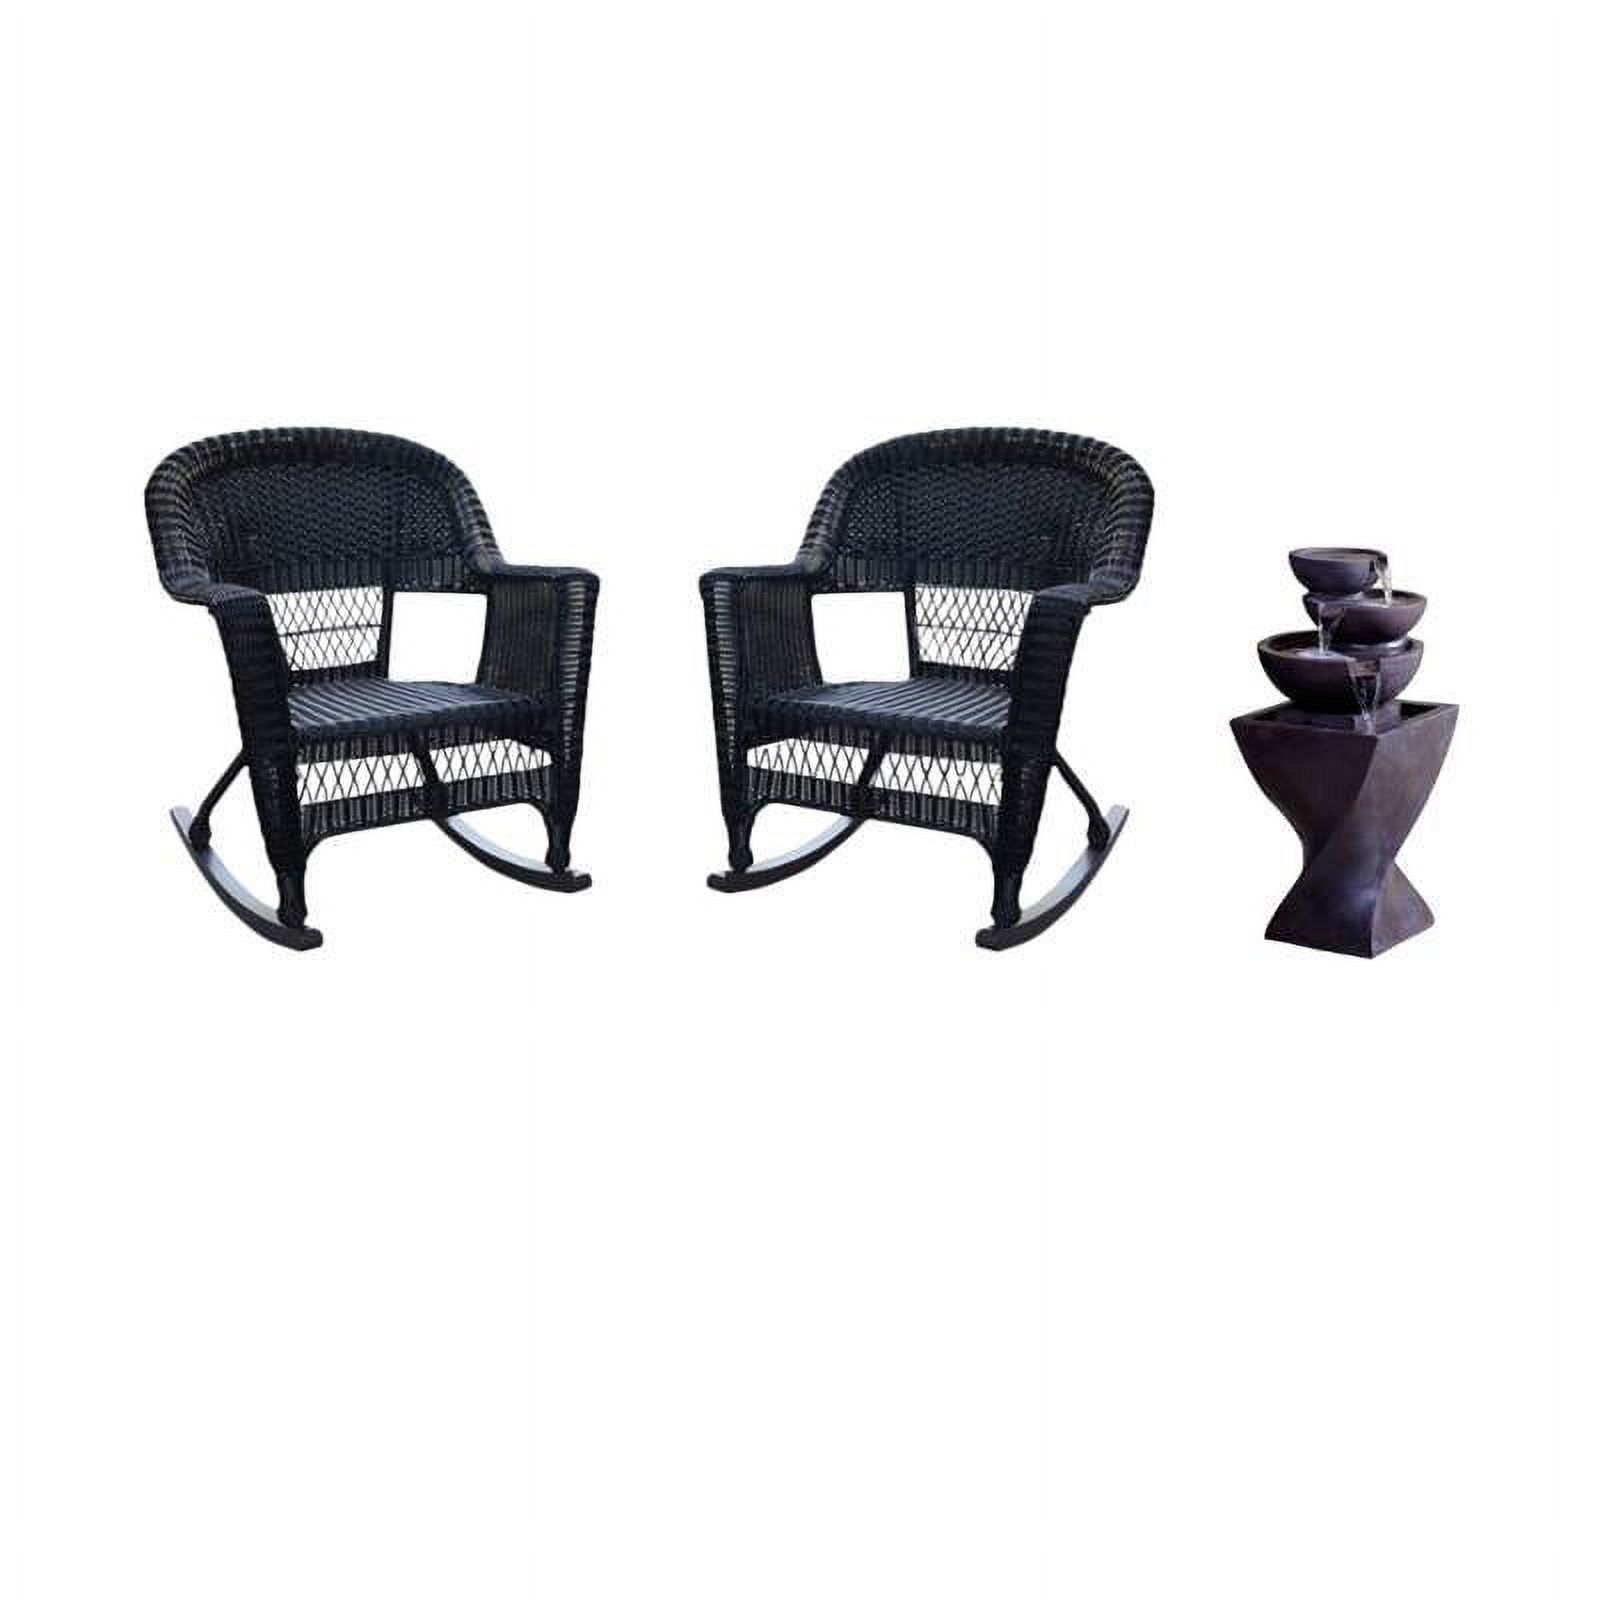 3 Piece Patio Furniture Set with (Set of 2) Patio Rocker and Water Fountain - image 1 of 5